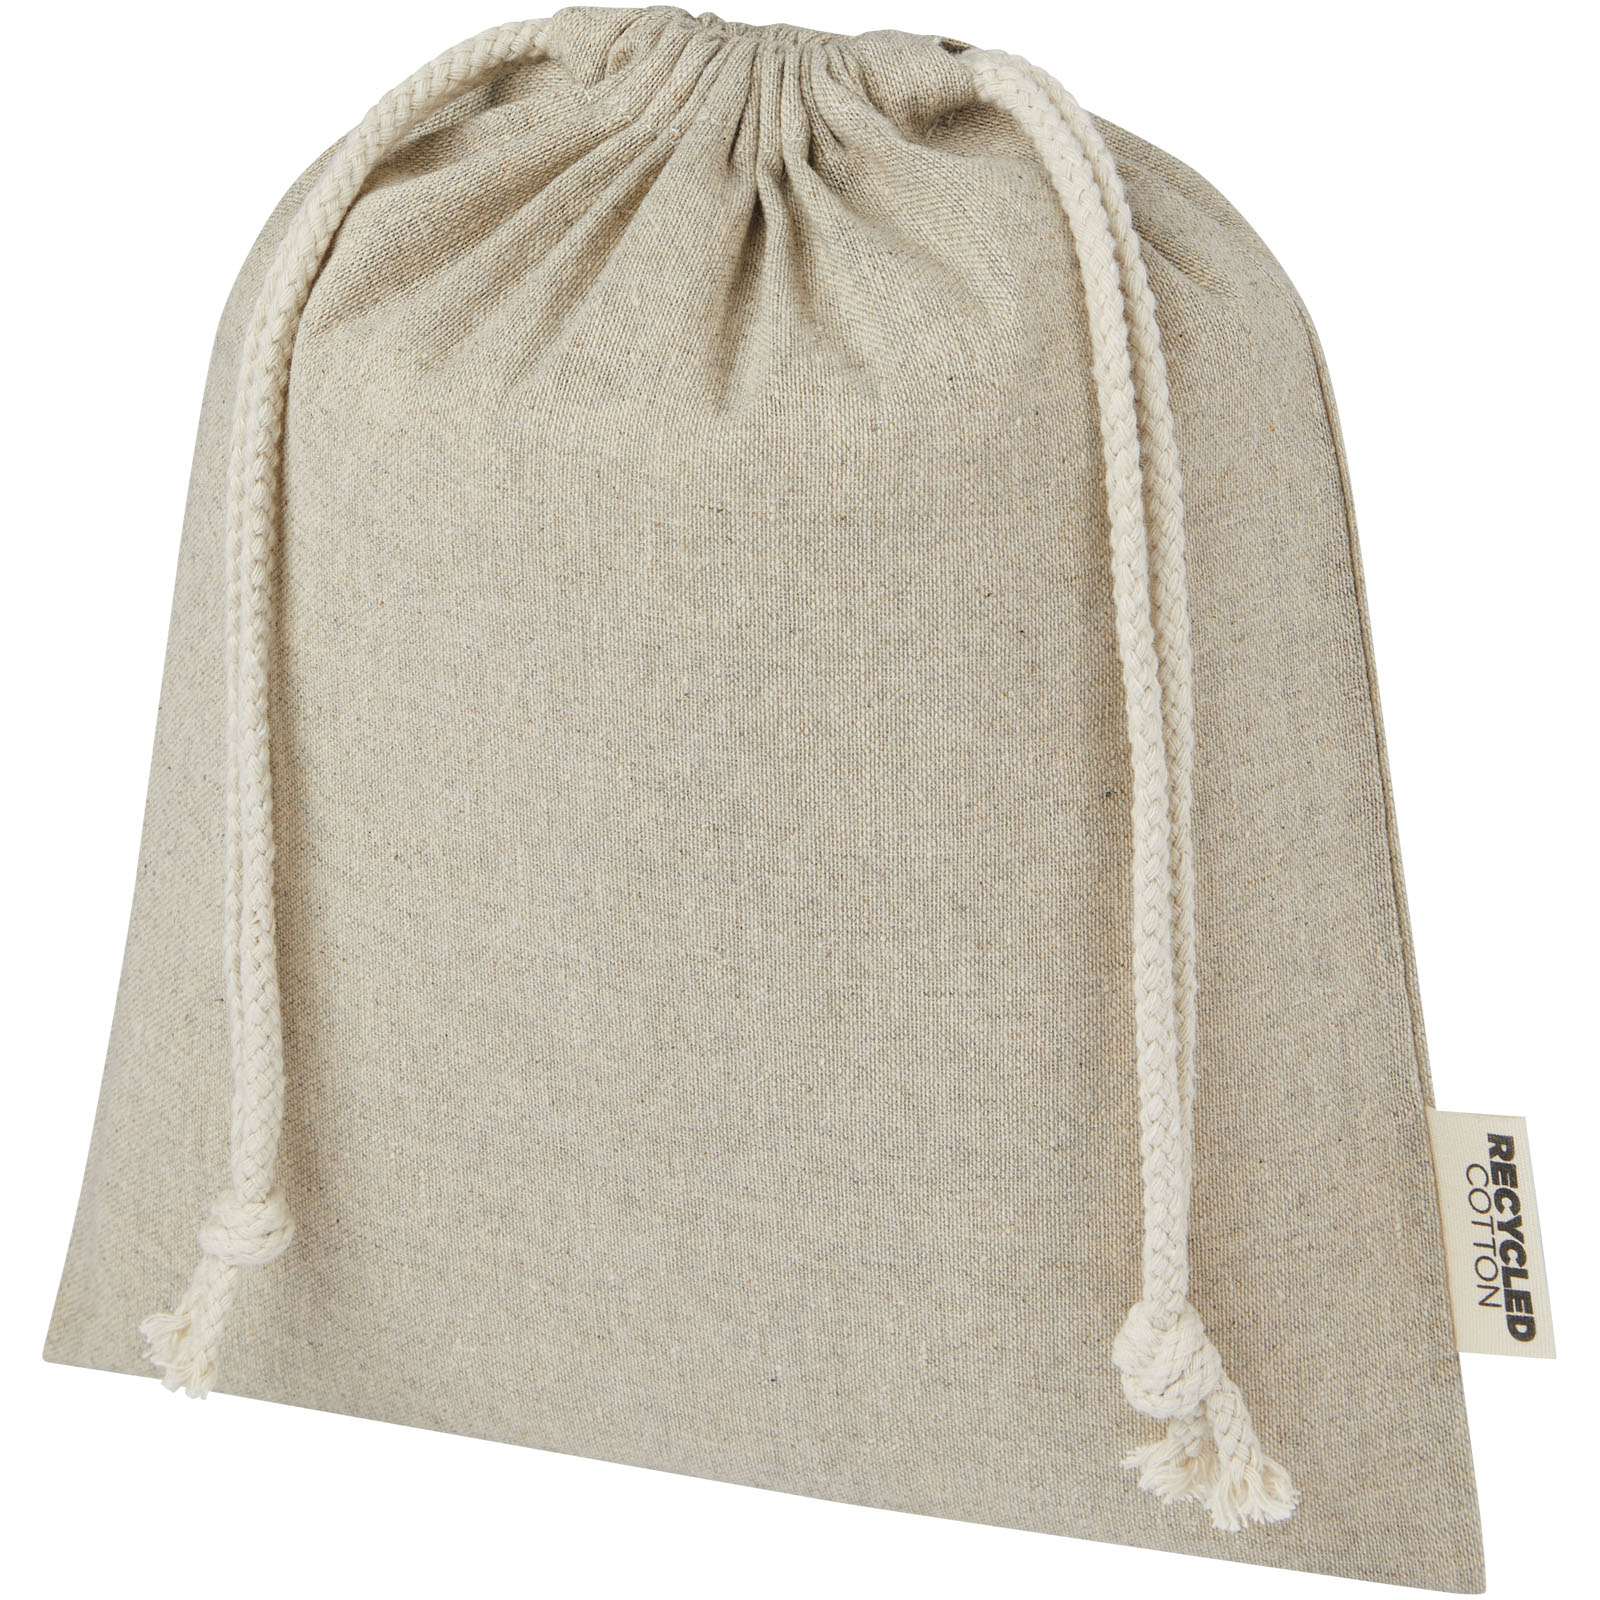 Advertising Cotton Bags - Pheebs 150 g/m² GRS recycled cotton gift bag medium 1.5L - 0